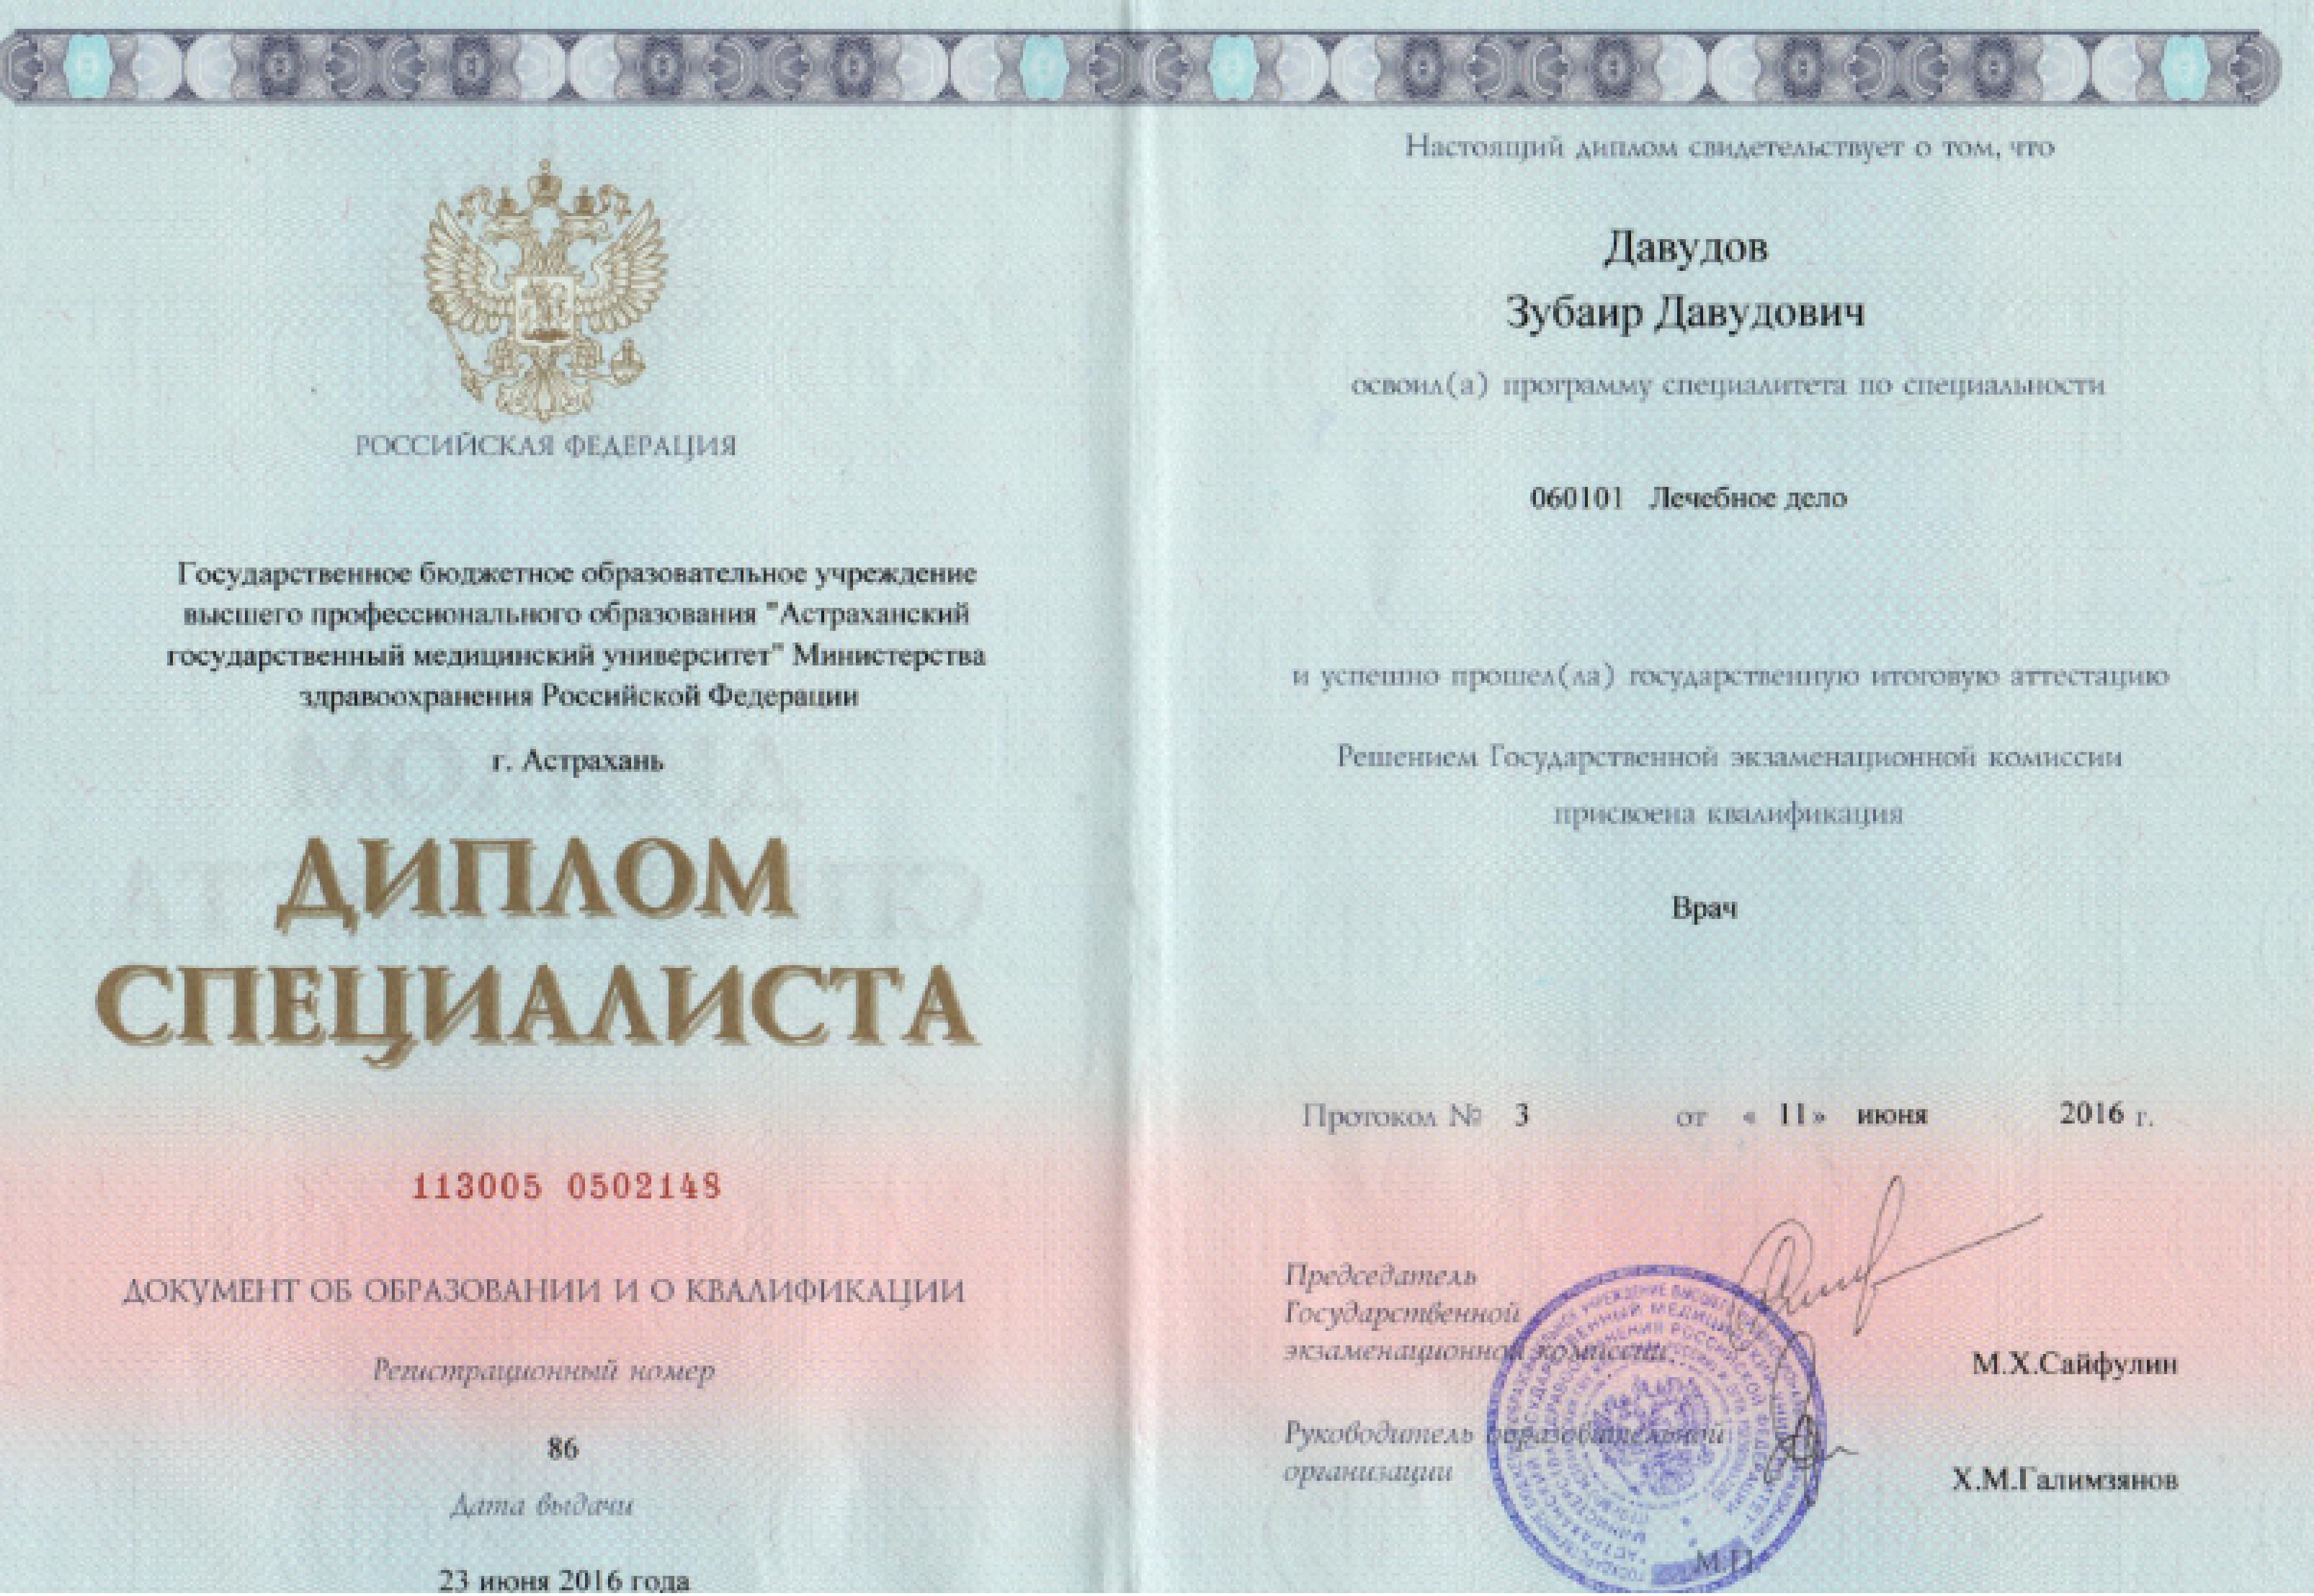 Specialist Diploma 